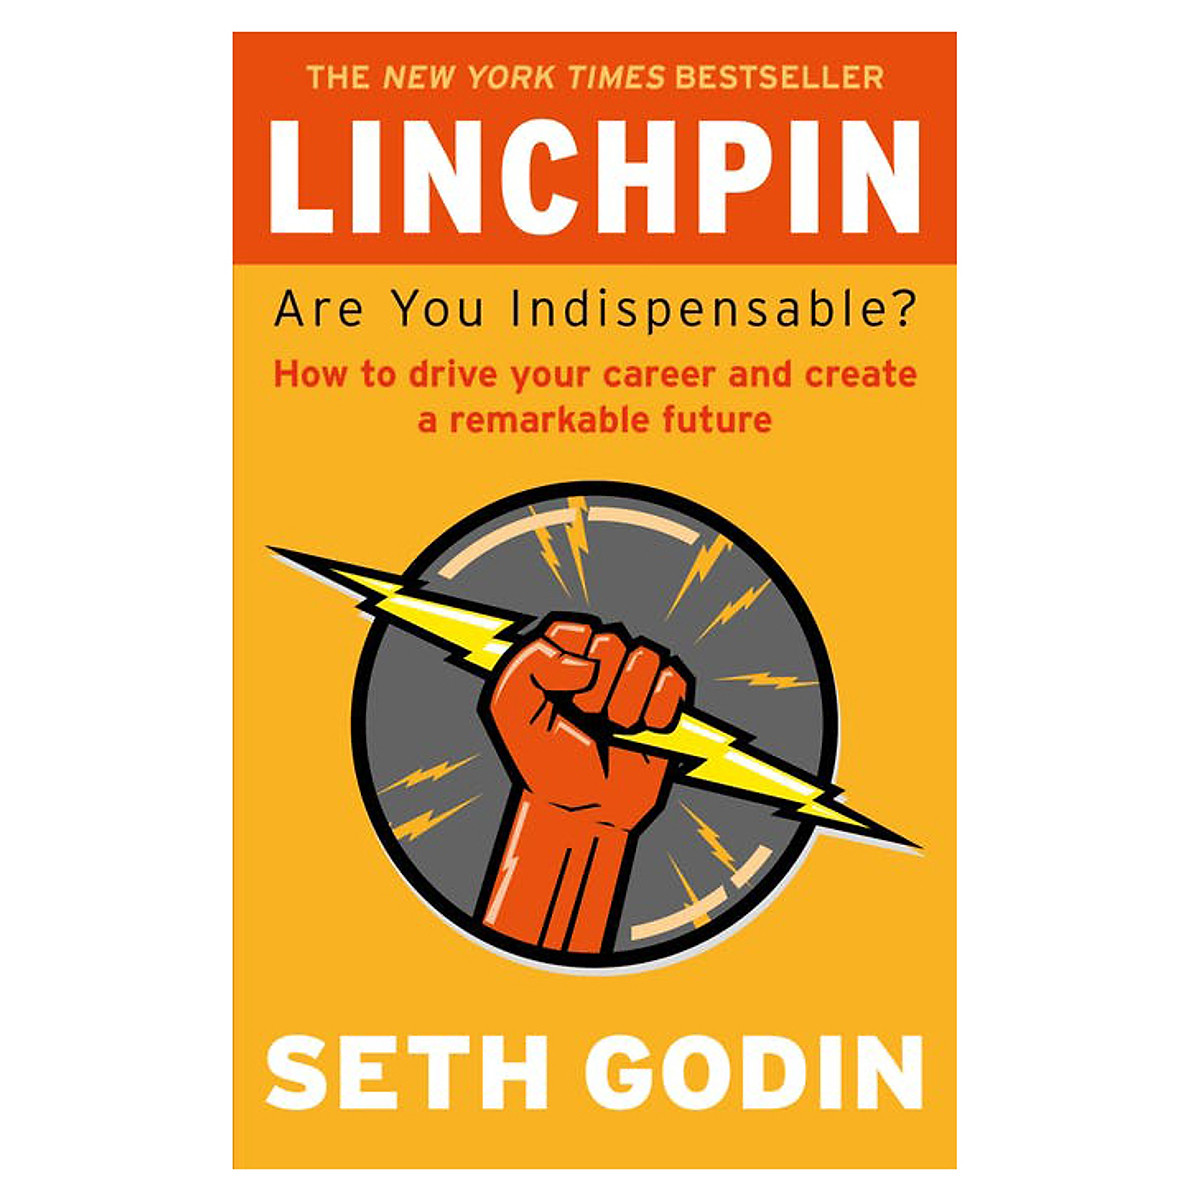 [Hàng thanh lý miễn đổi trả] Linchpin: Are You Indispensable? How To Drive Your Career And Create A Remarkable Future